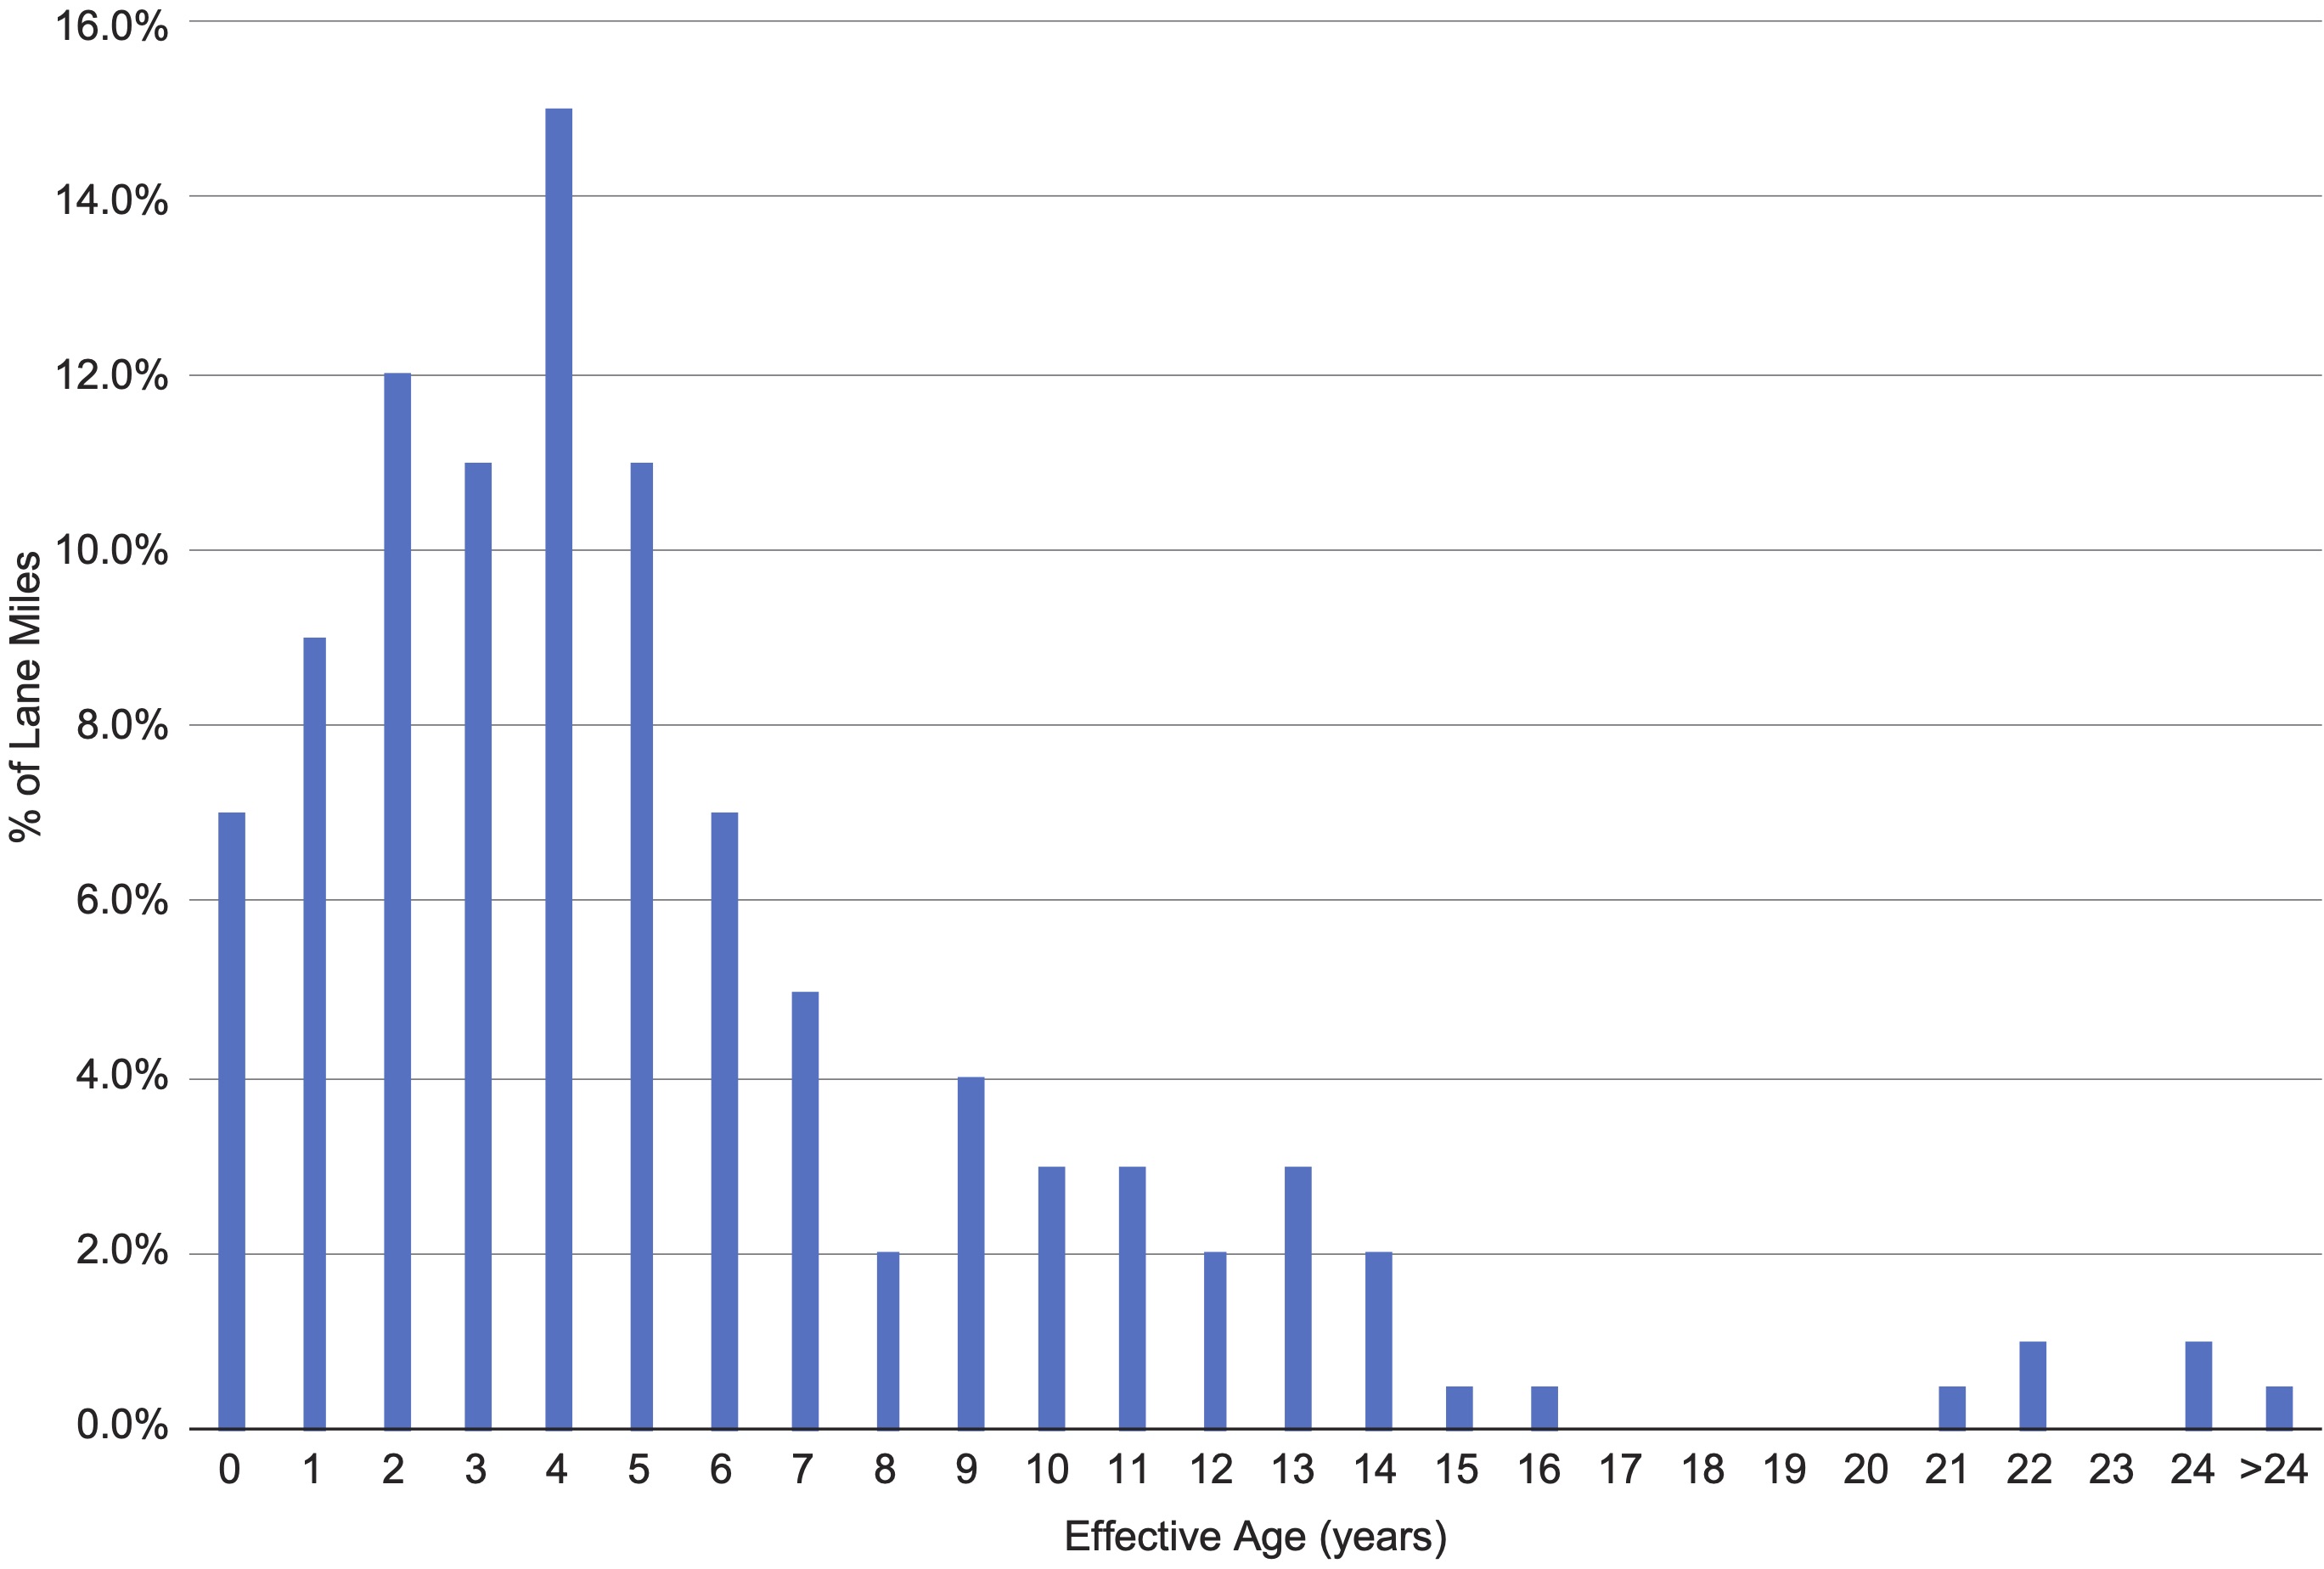 Bar chart showing the percent of lane miles in each effective age bucket. The graph is skewed left with a long tail.